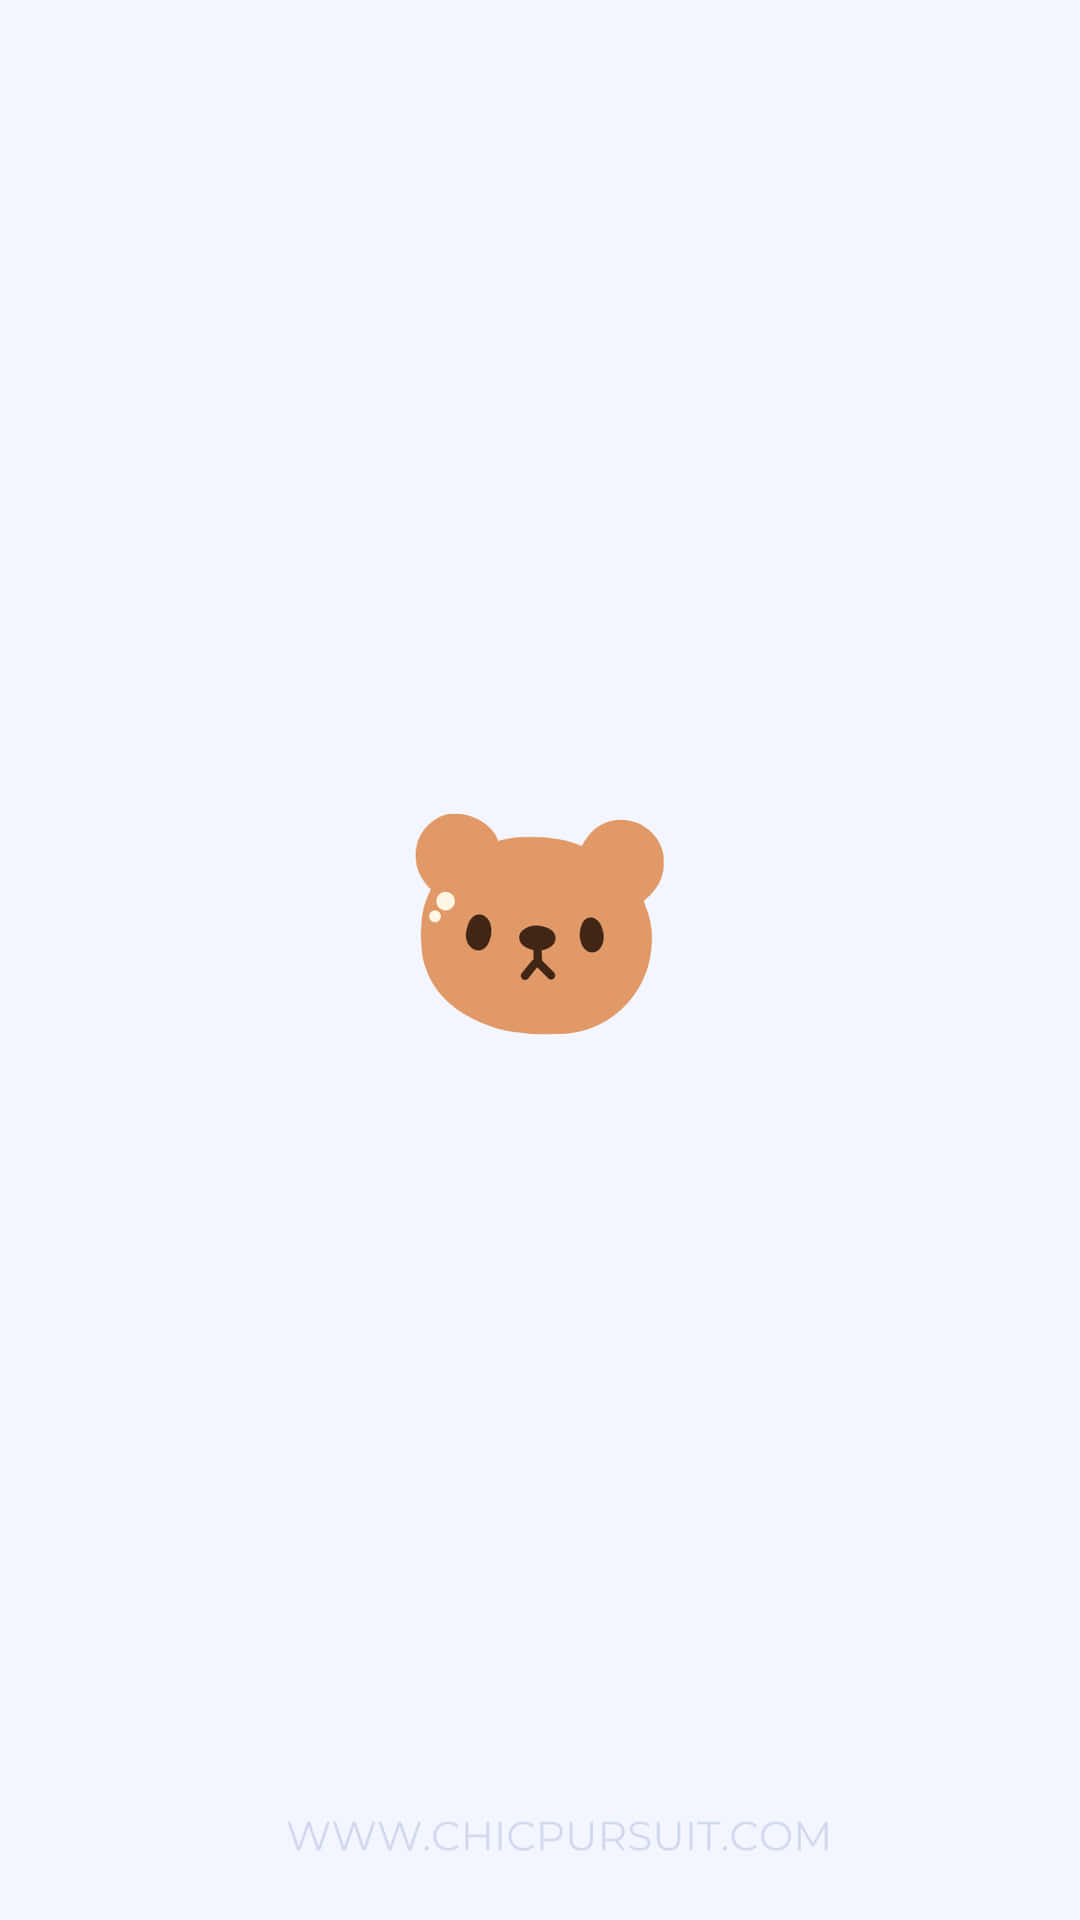 A Teddy Bear On A White Background Wallpaper